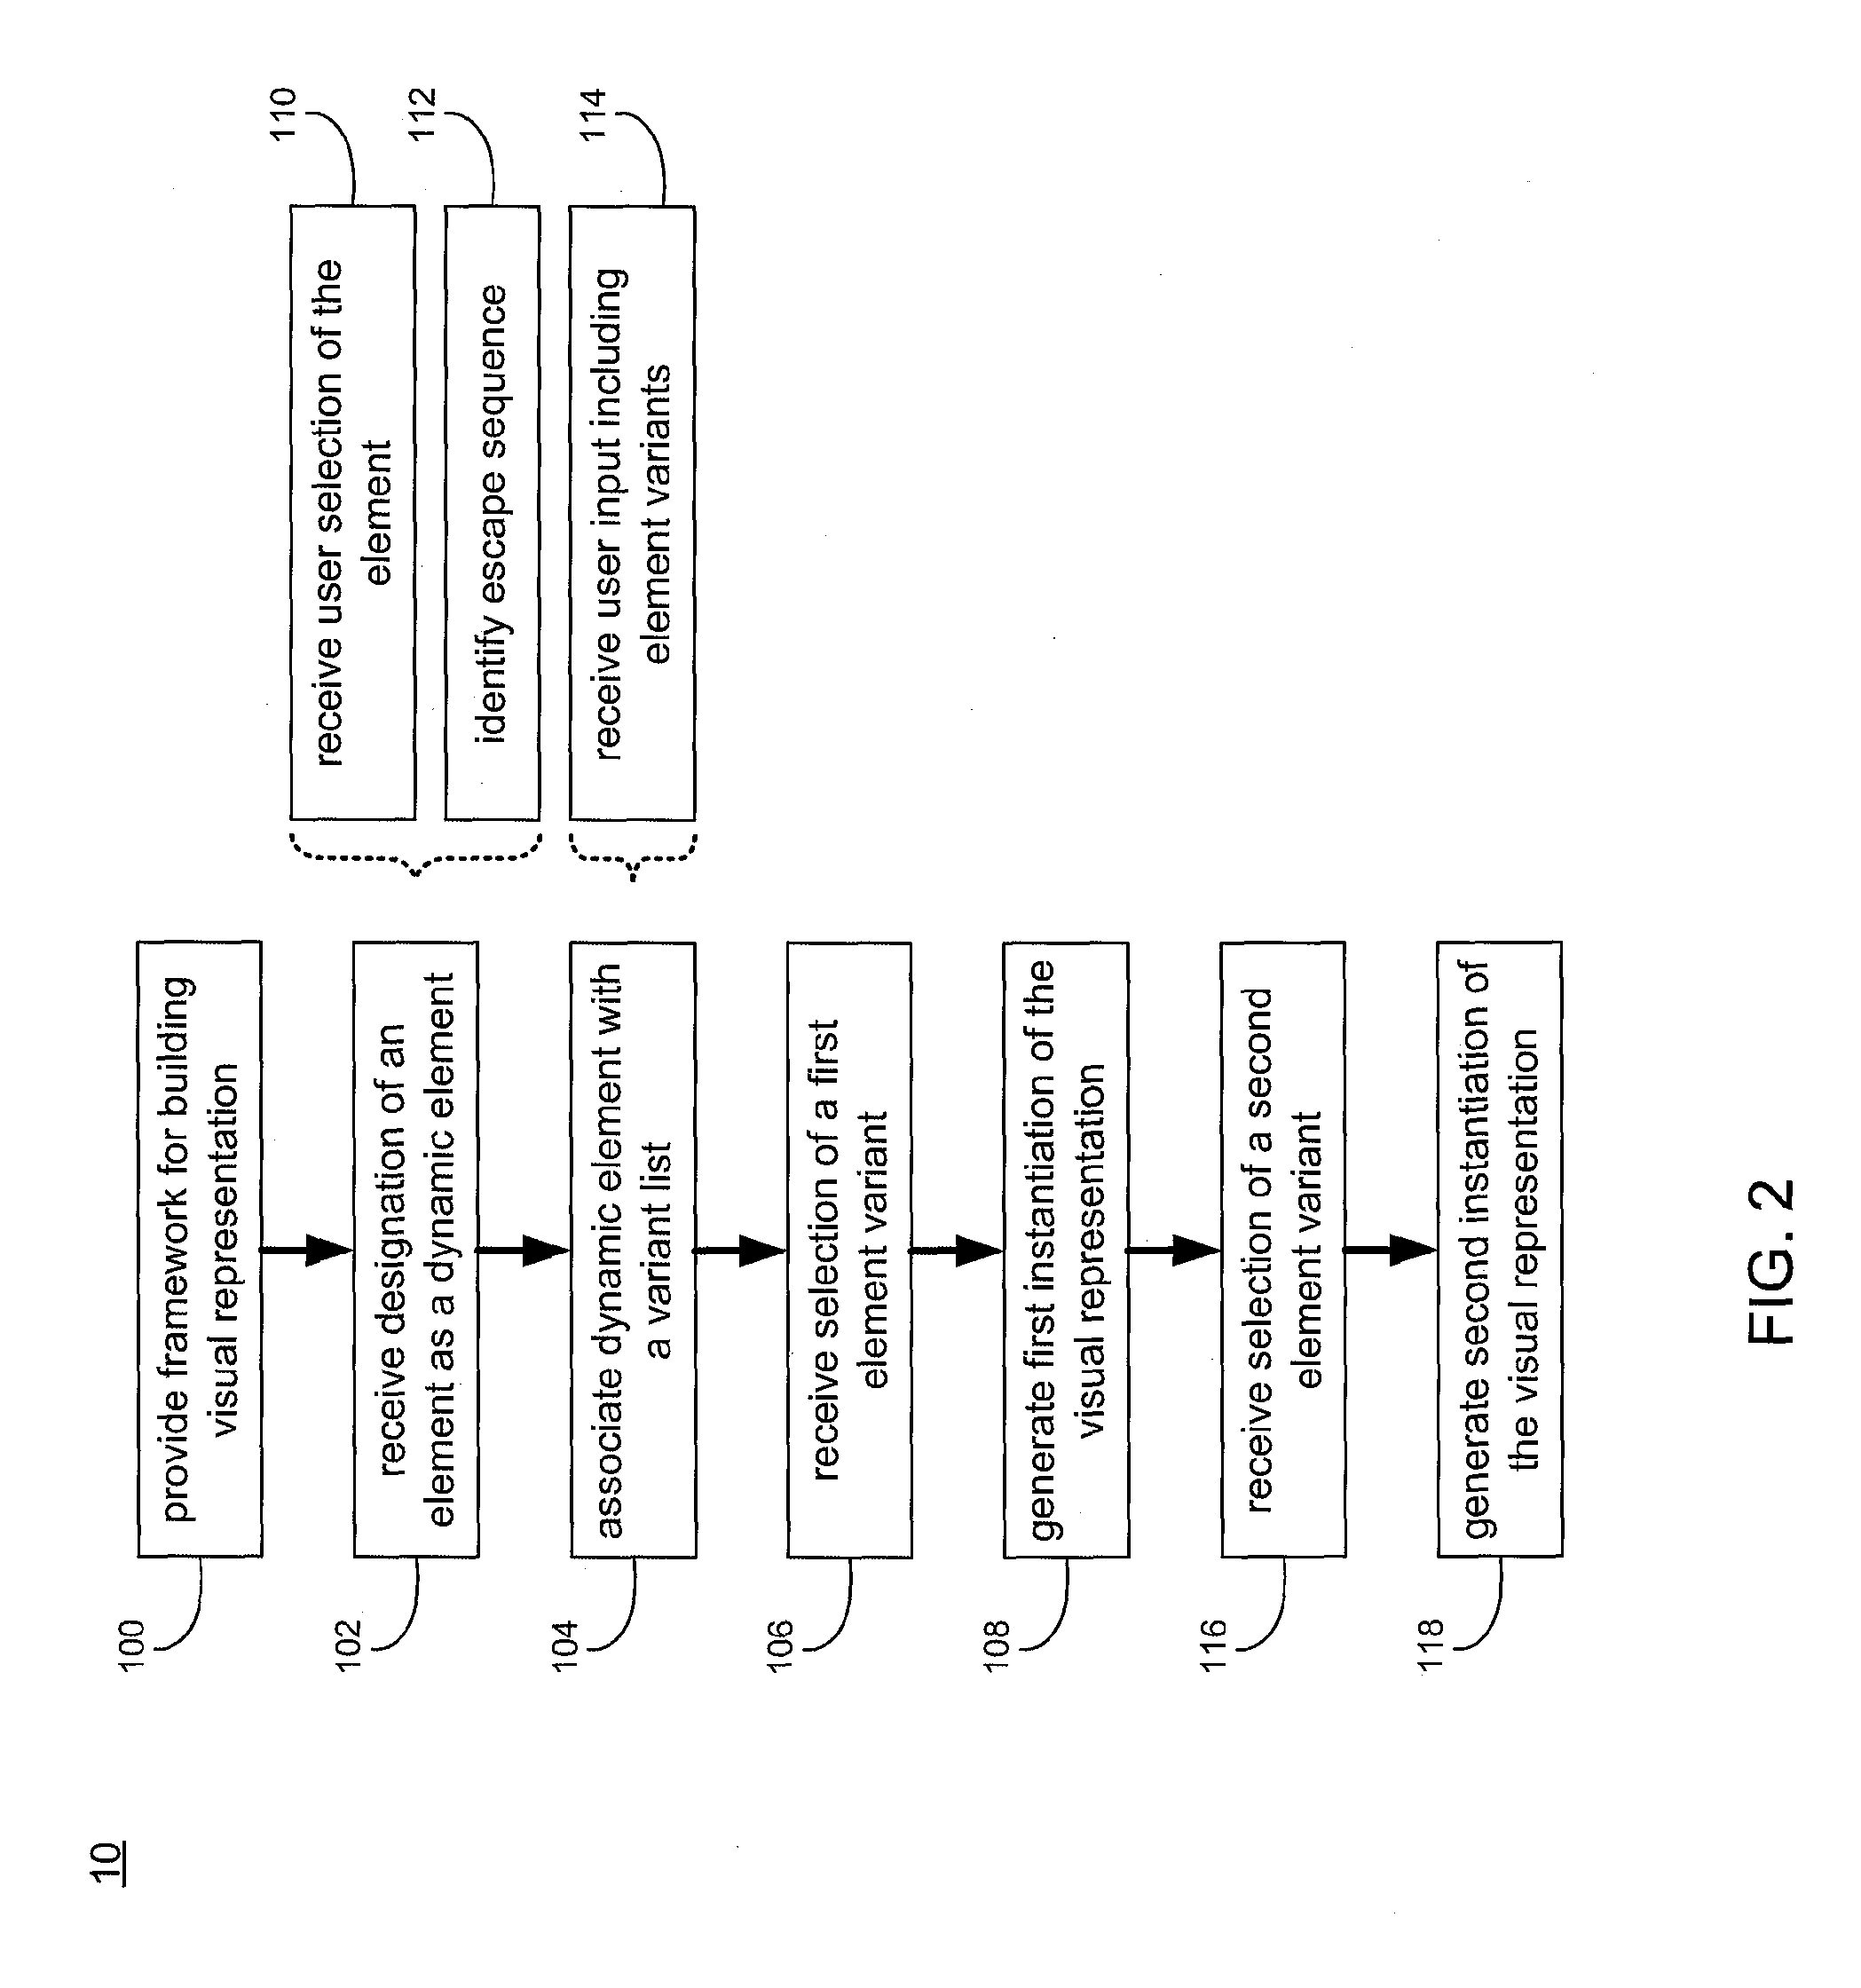 System and method for concept development with content aware text editor